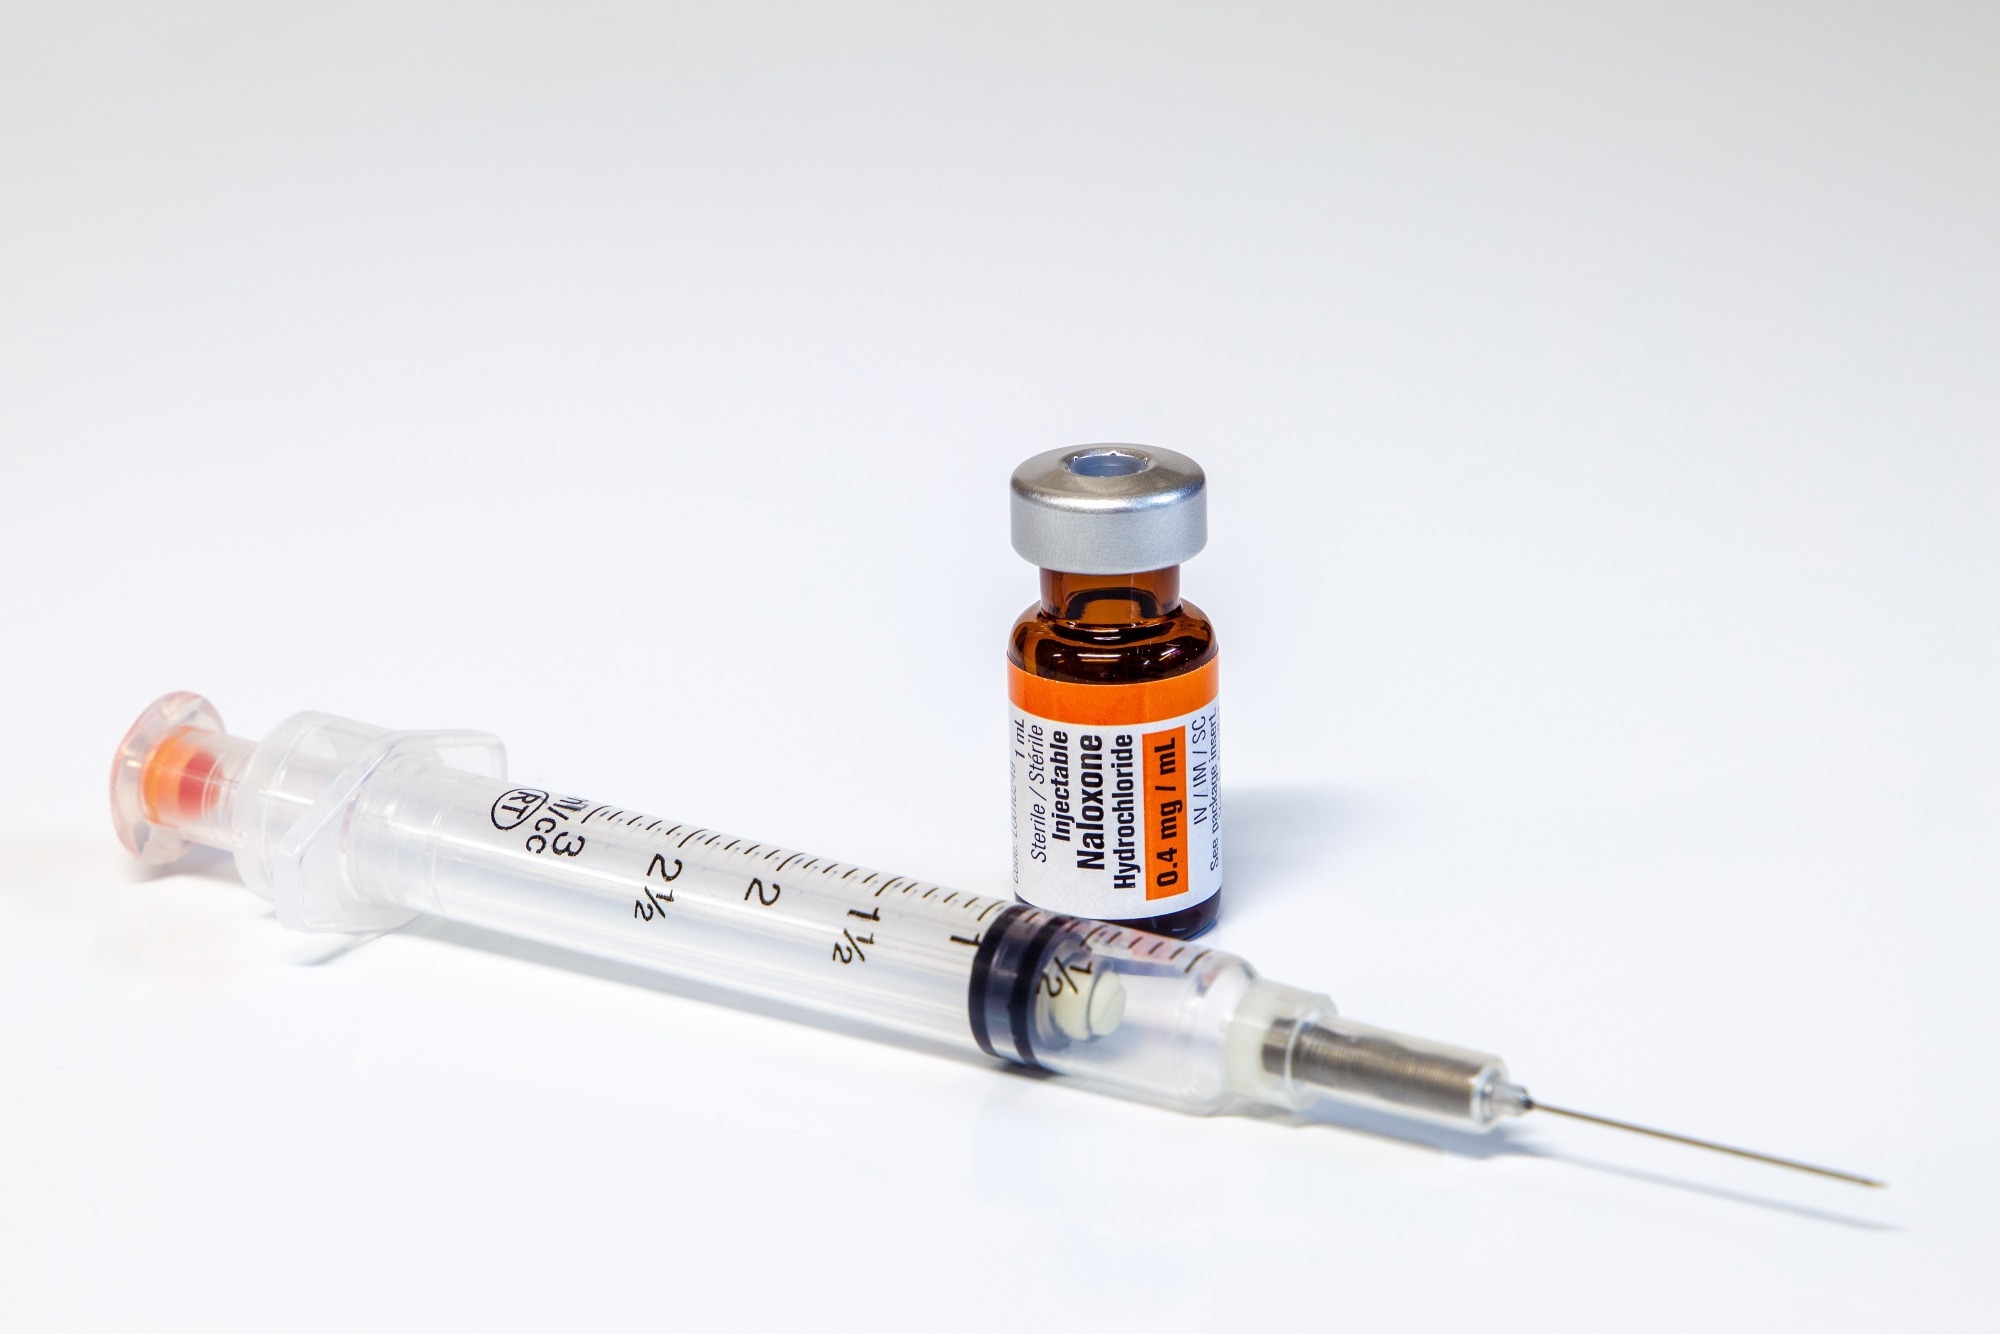 Study: High-Dose Naloxone Formulations Are Not as Essential as We Thought. Image Credit: Tomas Nevesely/Shutterstock.com